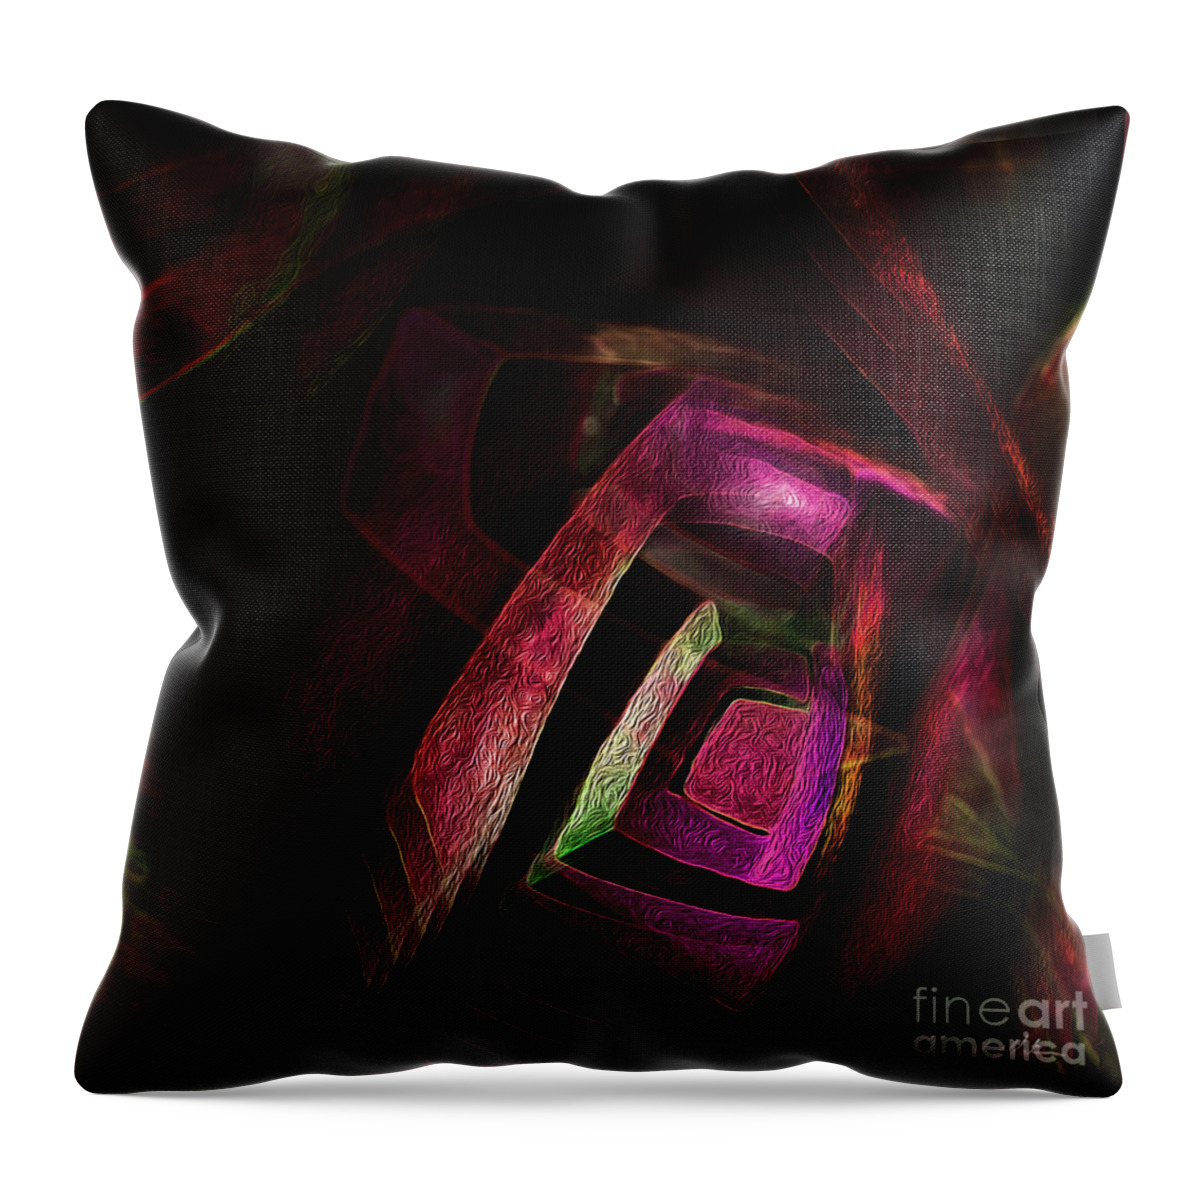 Surreal Moods Throw Pillow featuring the digital art Surreal Moods 3 by Aldane Wynter